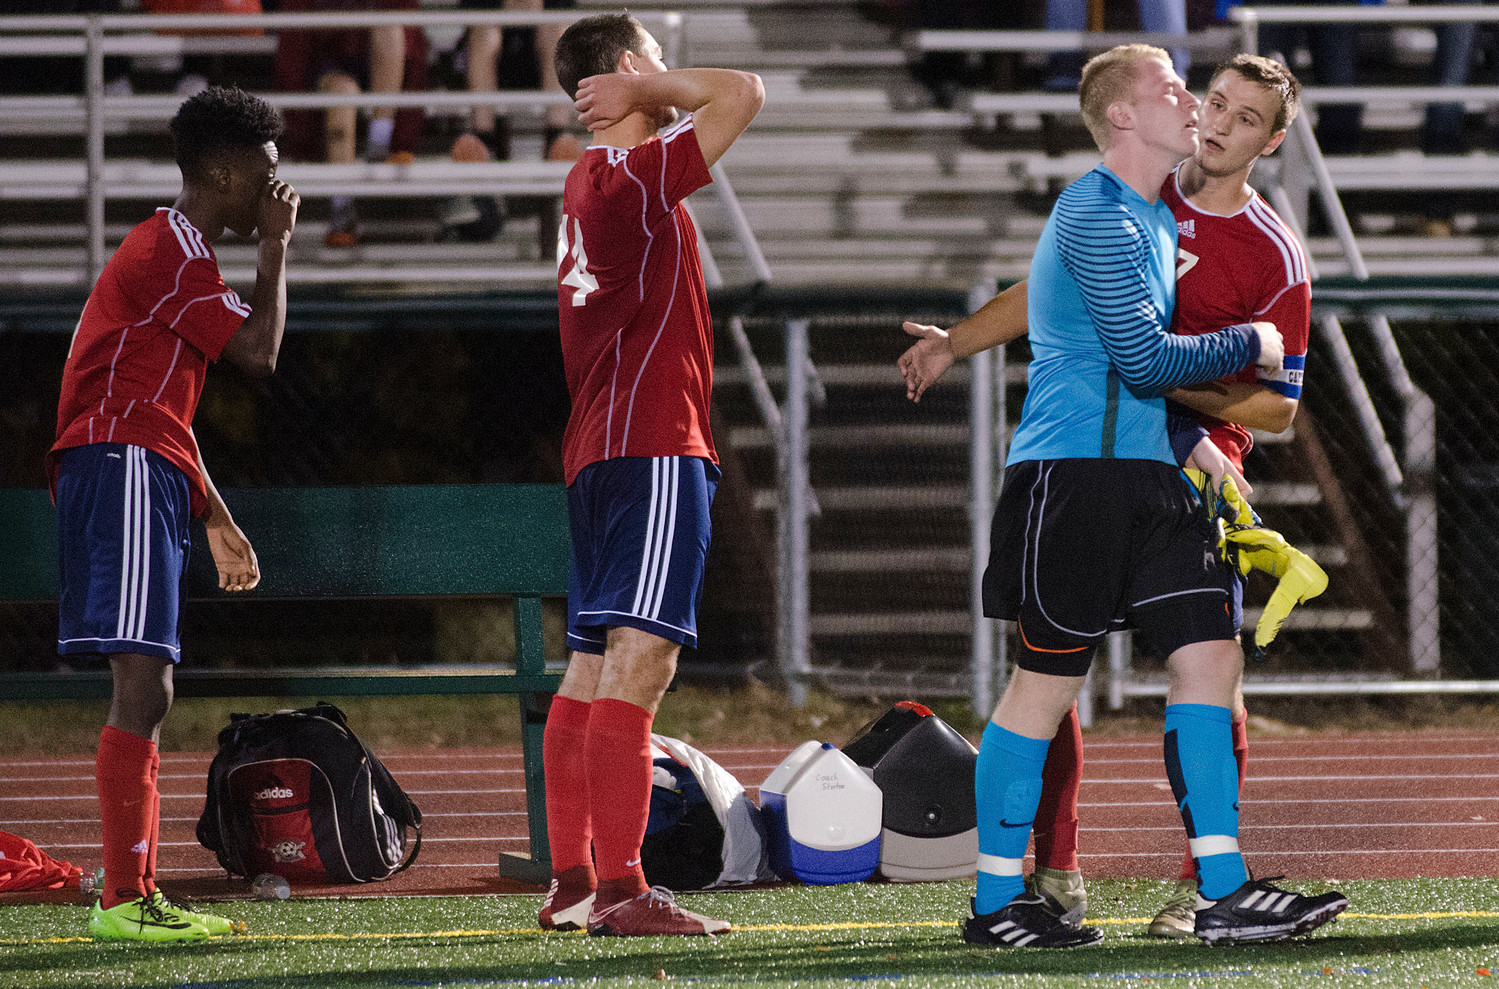 Senior goalkeeper Will Swart (right) and teammates reflect after the loss.